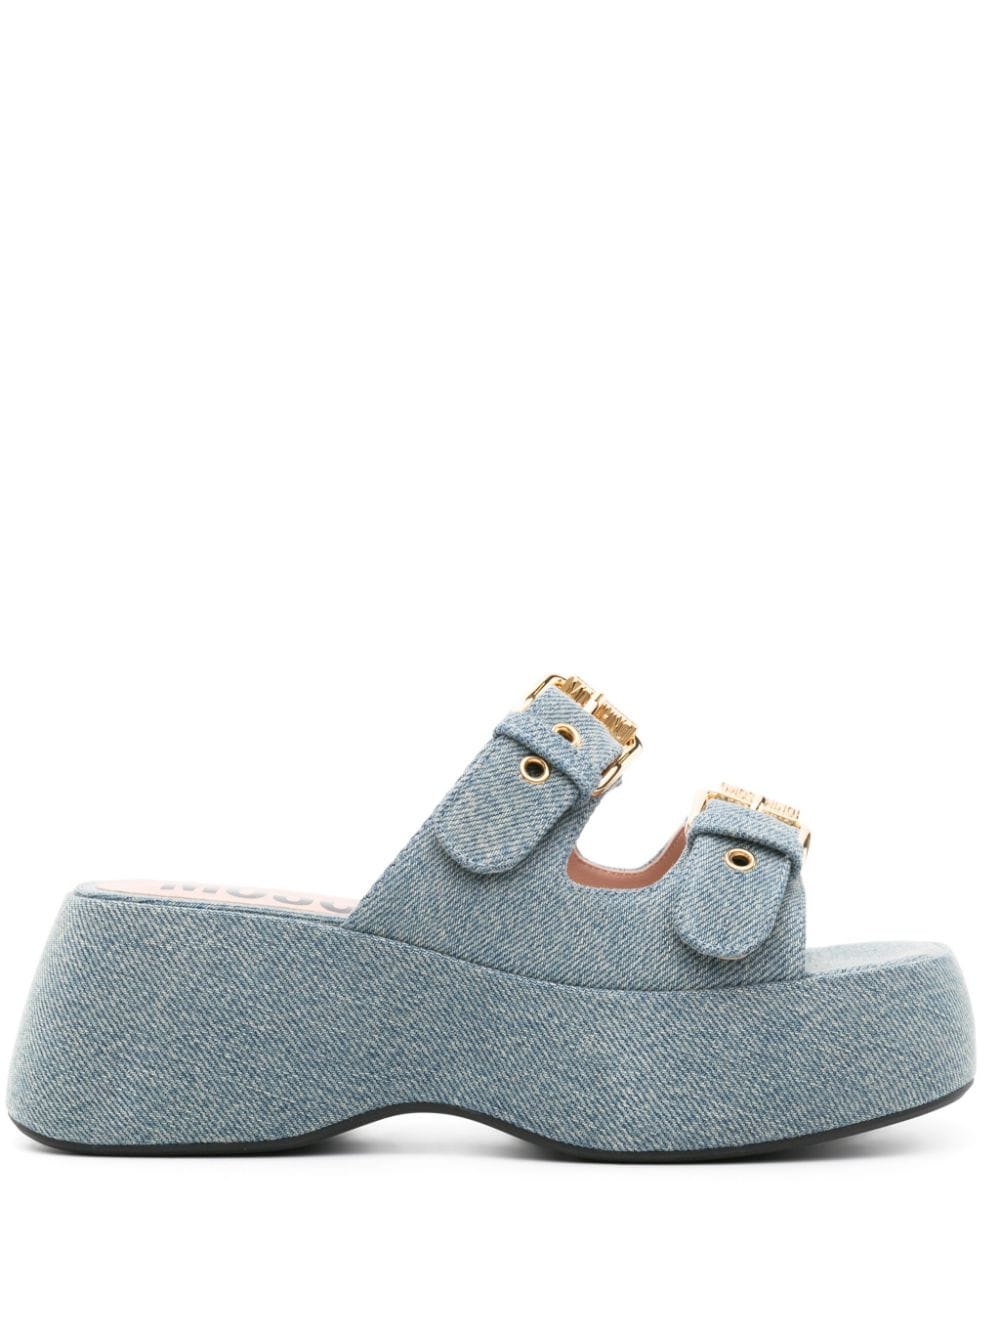 Moschino Dolly 75mm Denim Mules In Blue